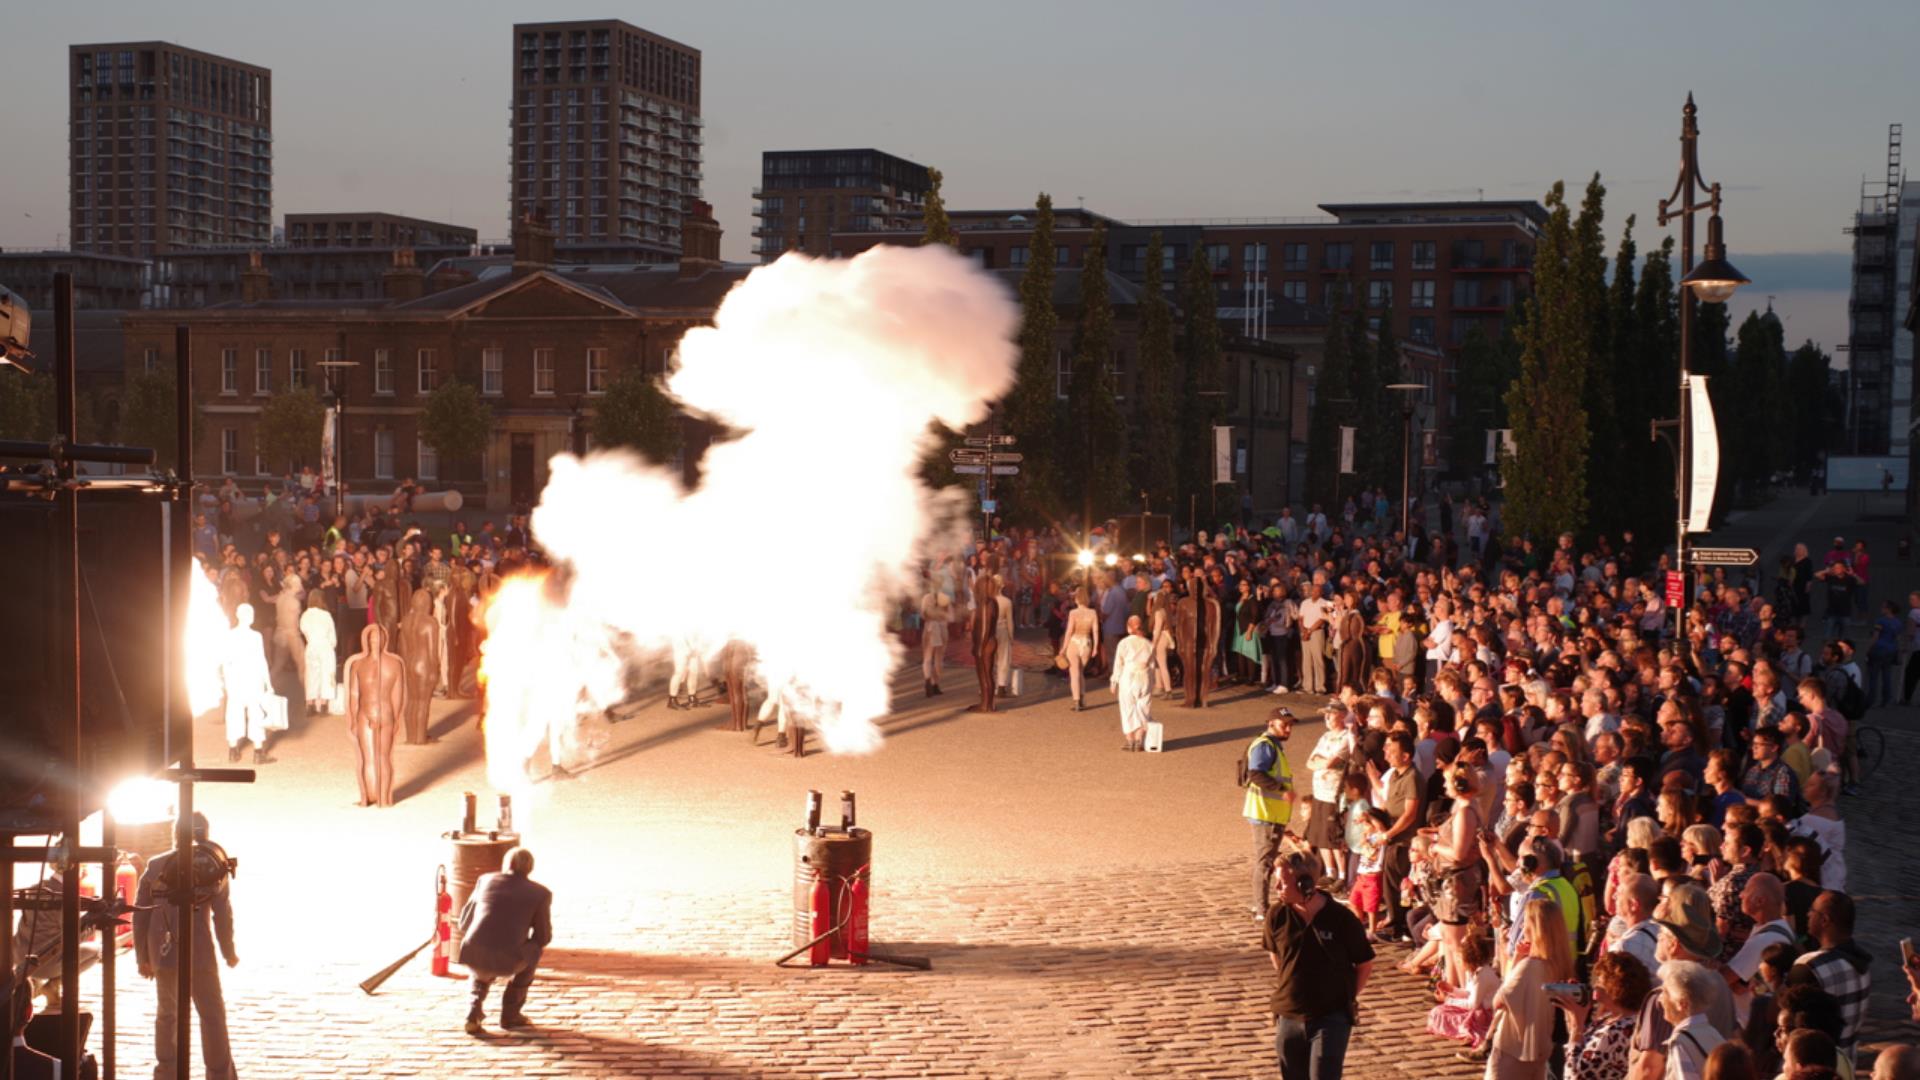 An event in Royal Arsenal in Woolwich as part of Greenwich and Docklands International Festival.